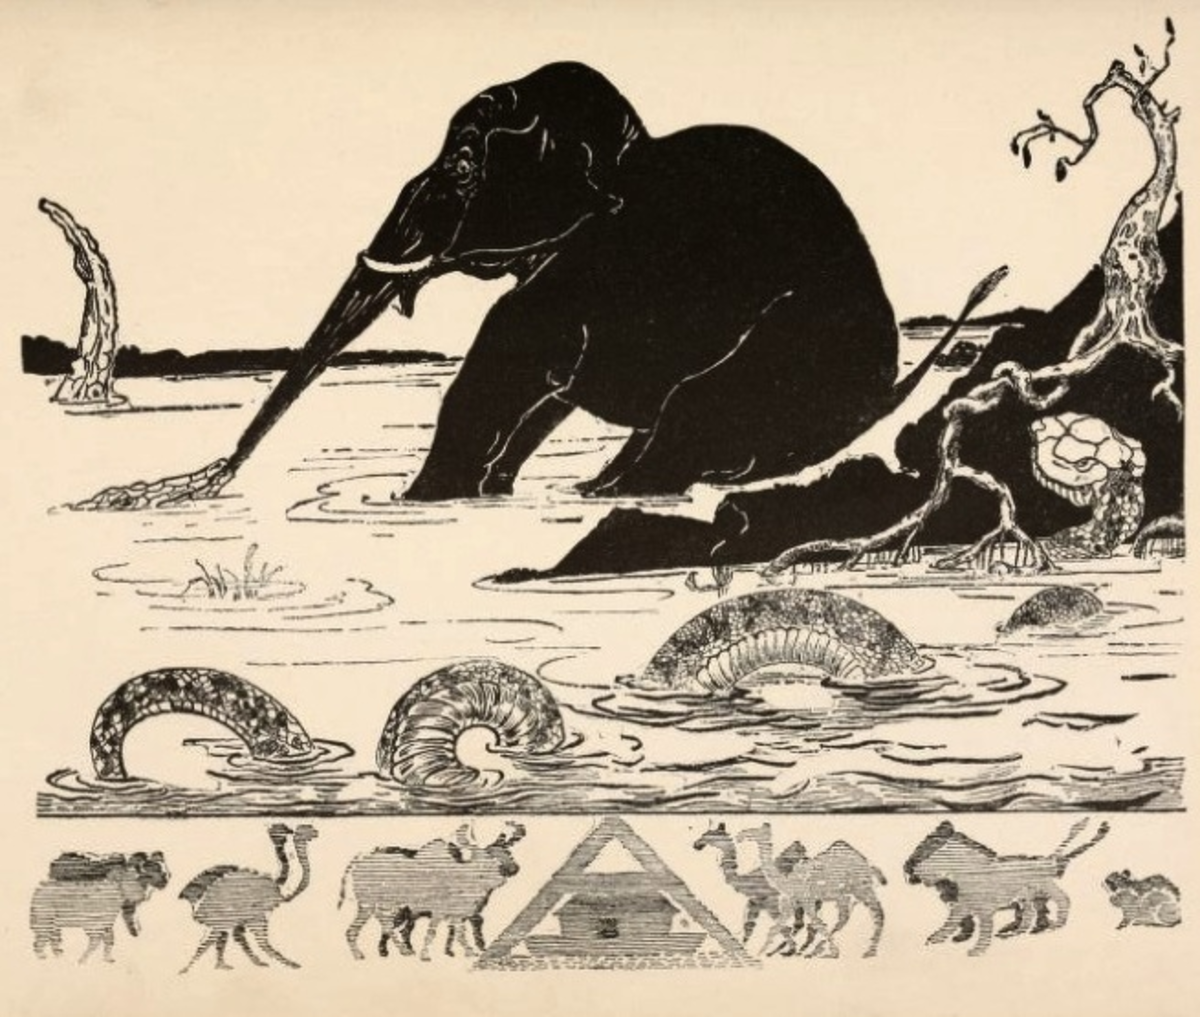 Dramatization of the Elephant's Child, After R. Kipling